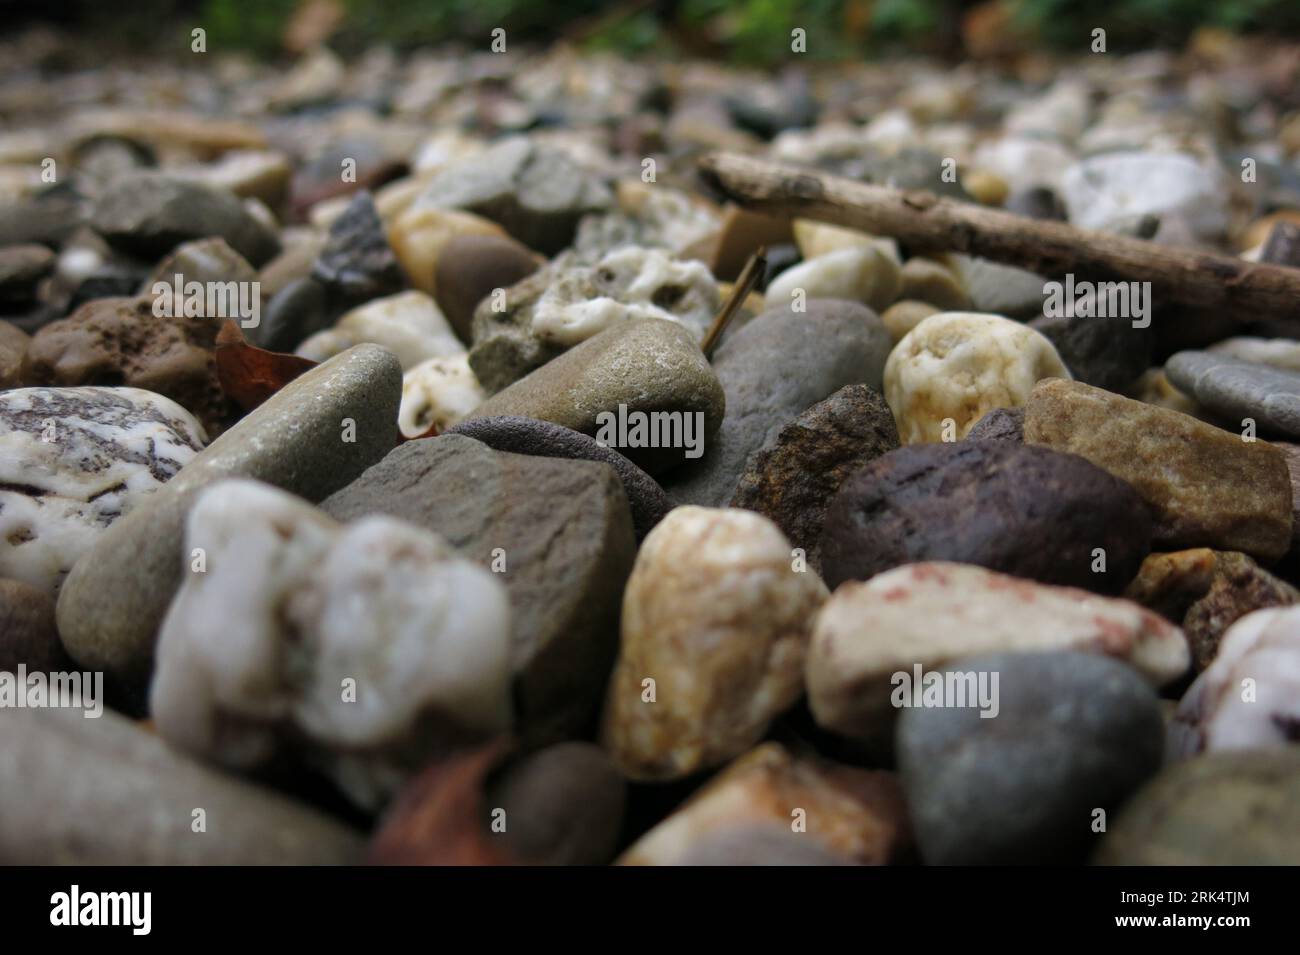 A close-up shot of a pile of rocks in different shades of grey and ...